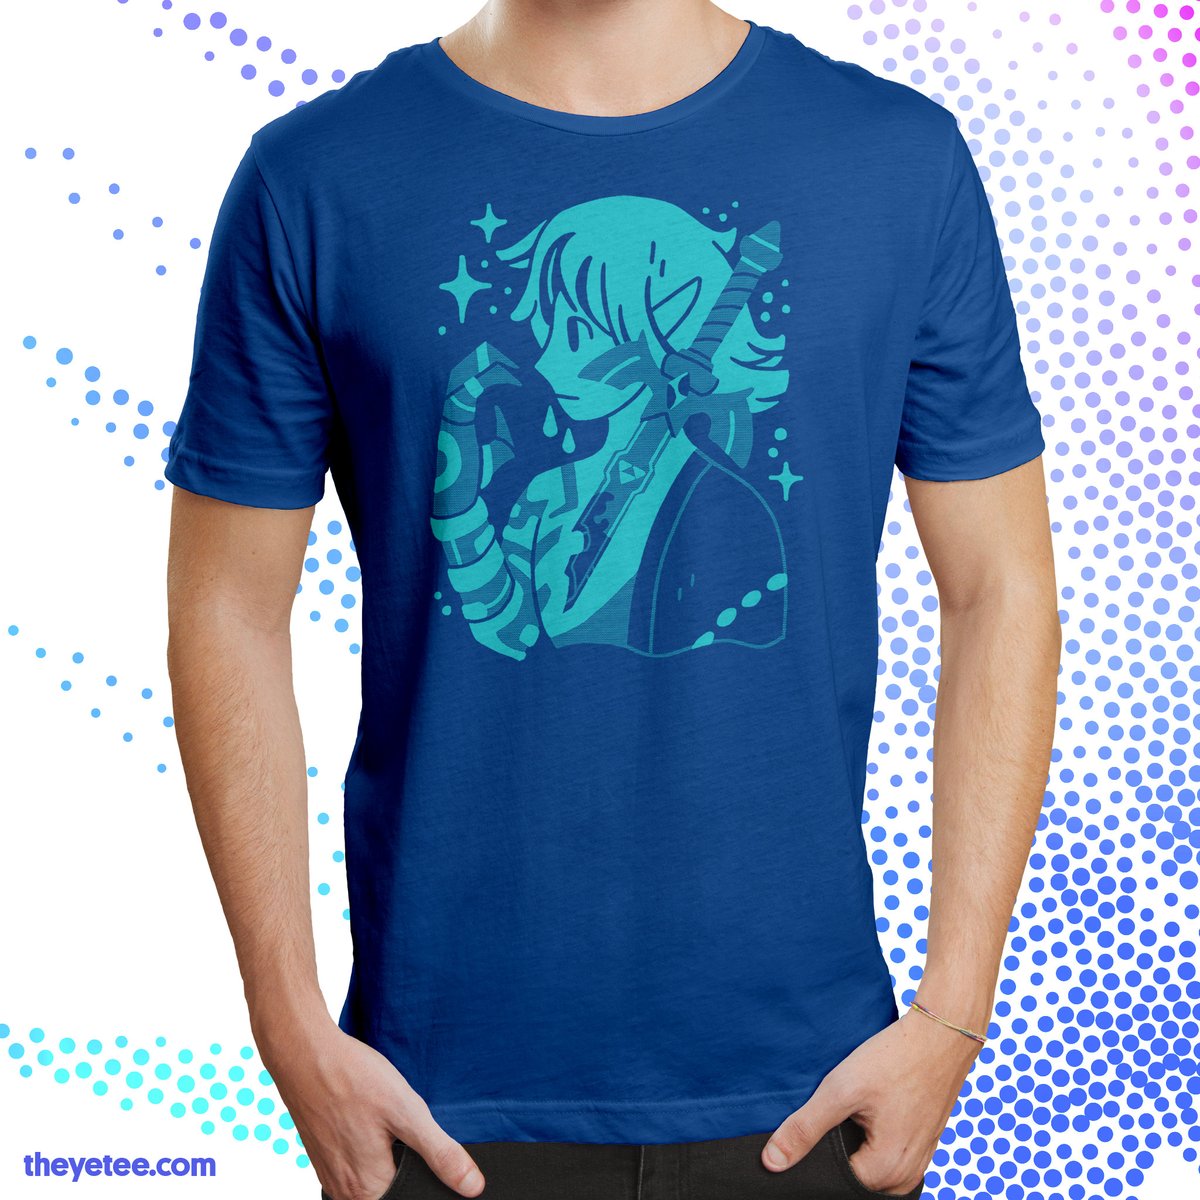 「The kingdom ain't exactly what it used t」|The Yetee 🌈のイラスト